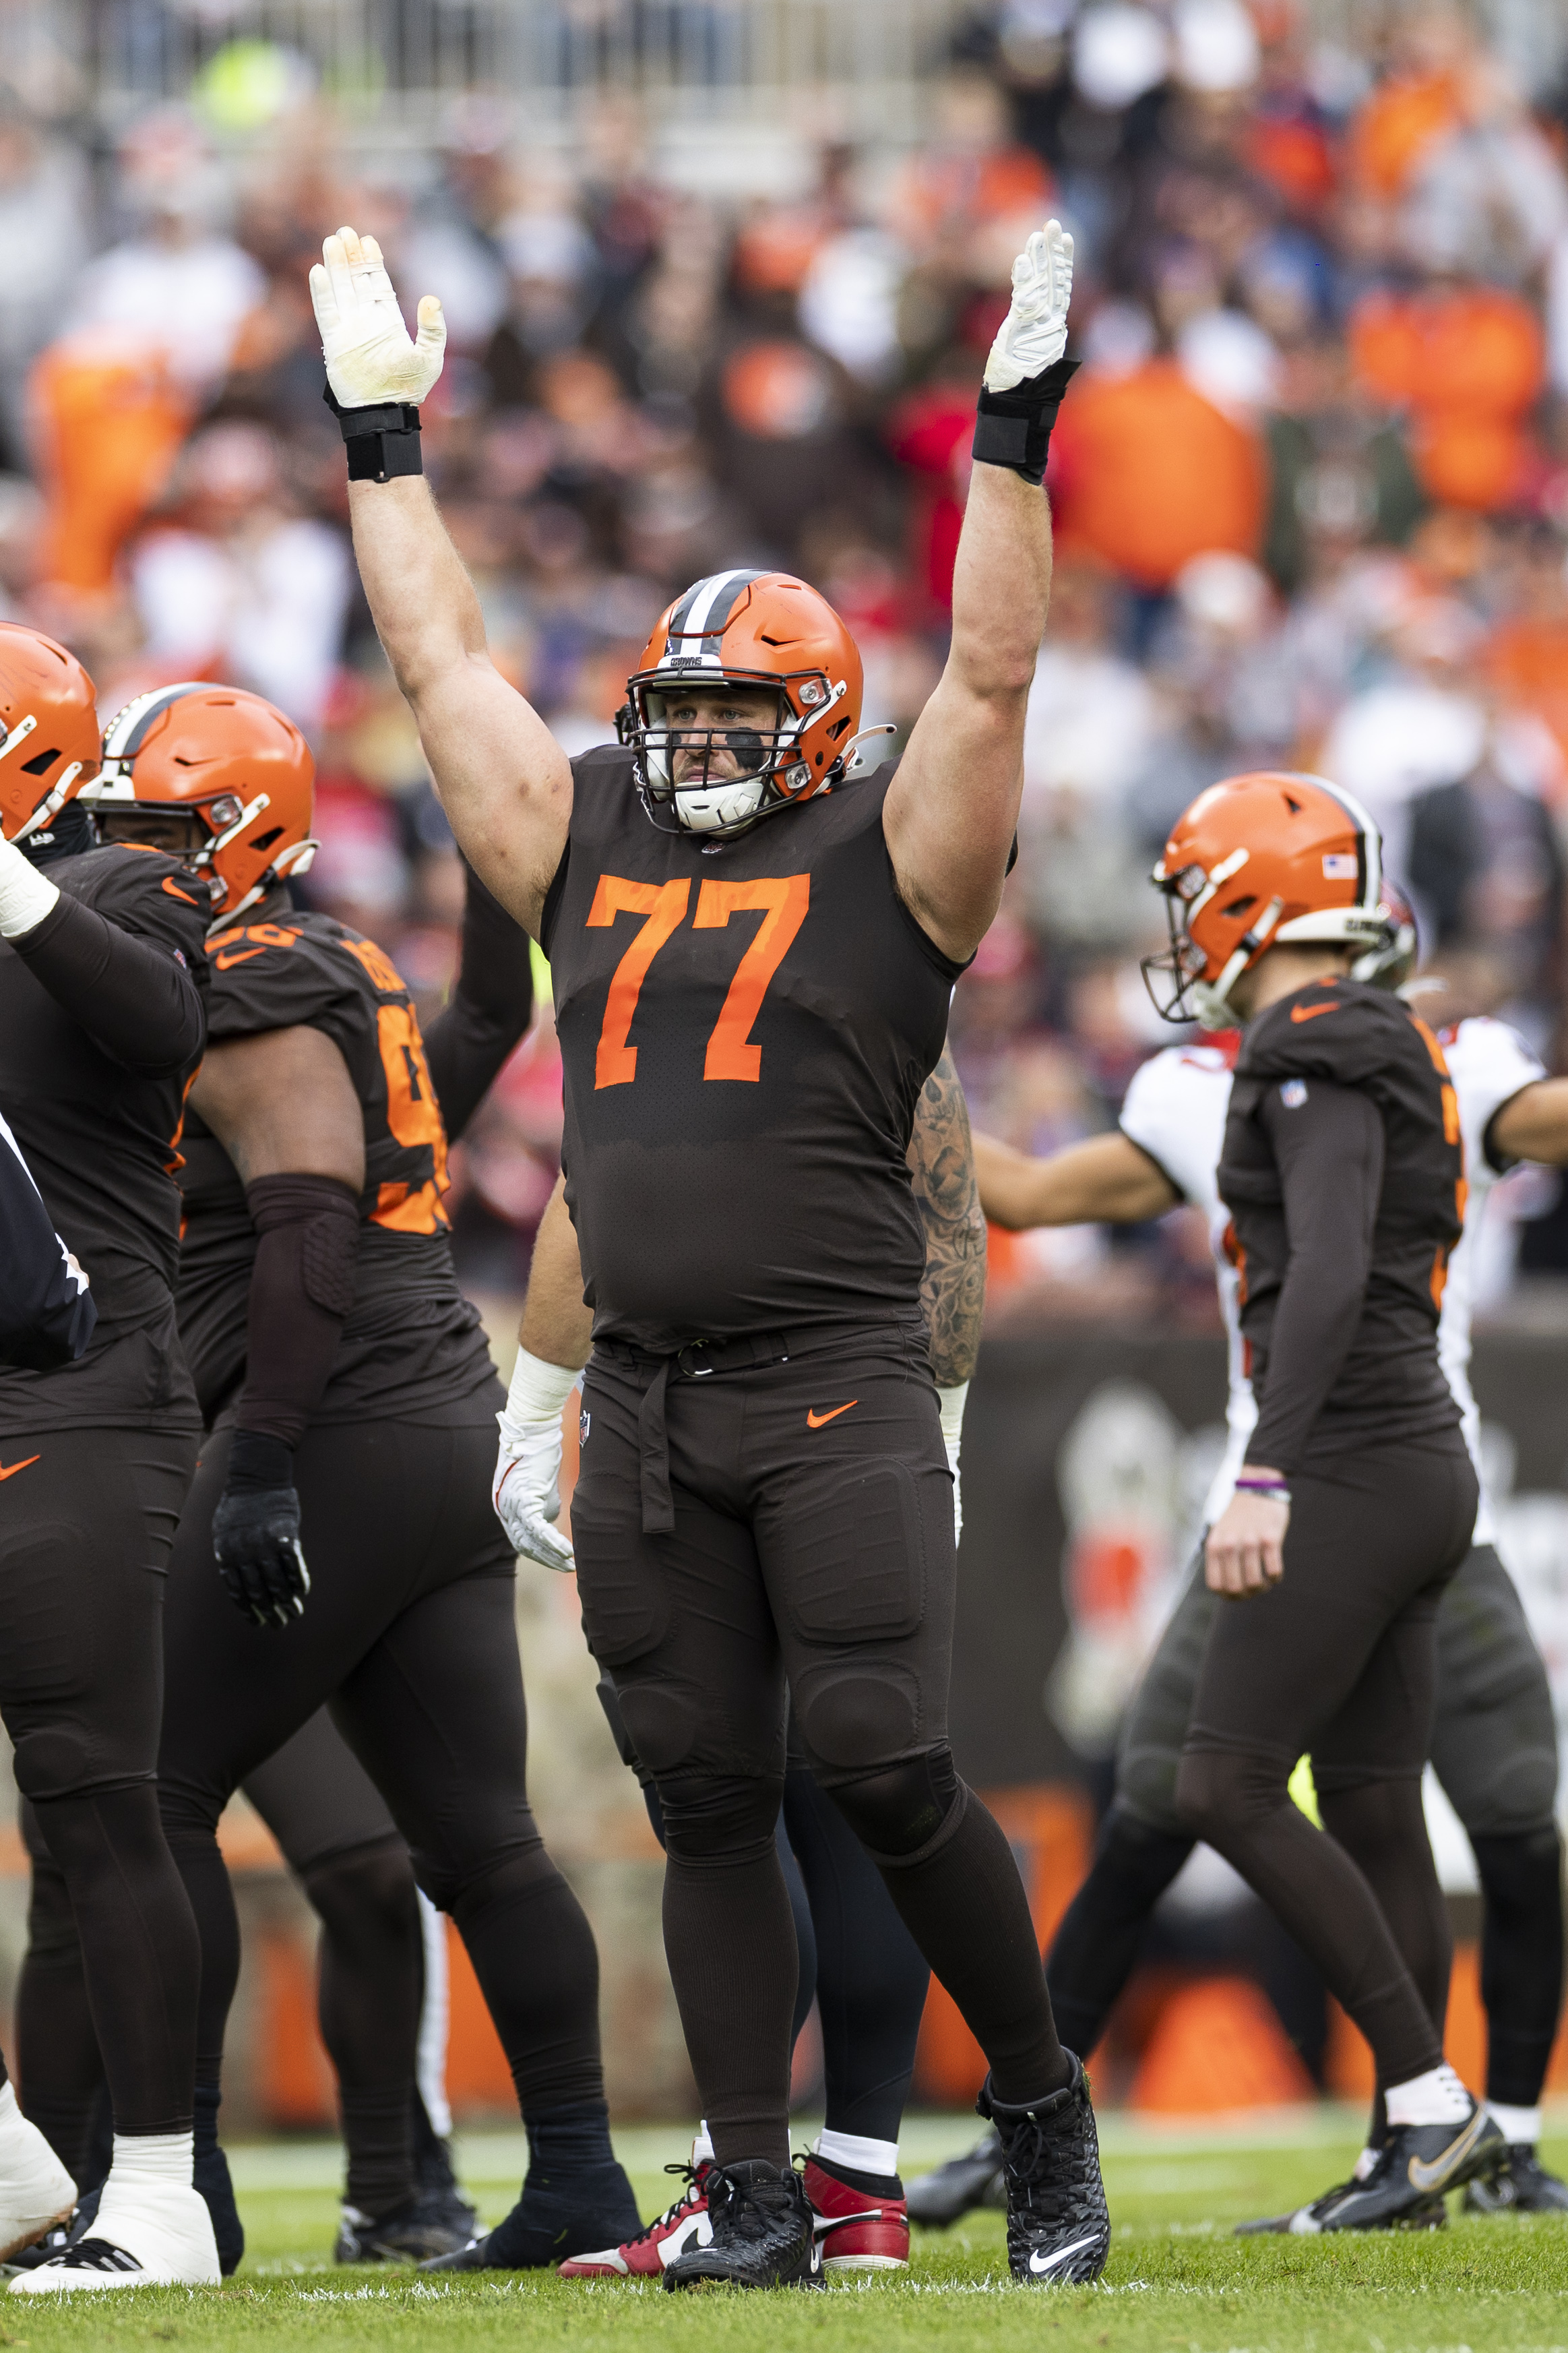 NFL: Tampa Bay Buccaneers at Cleveland Browns